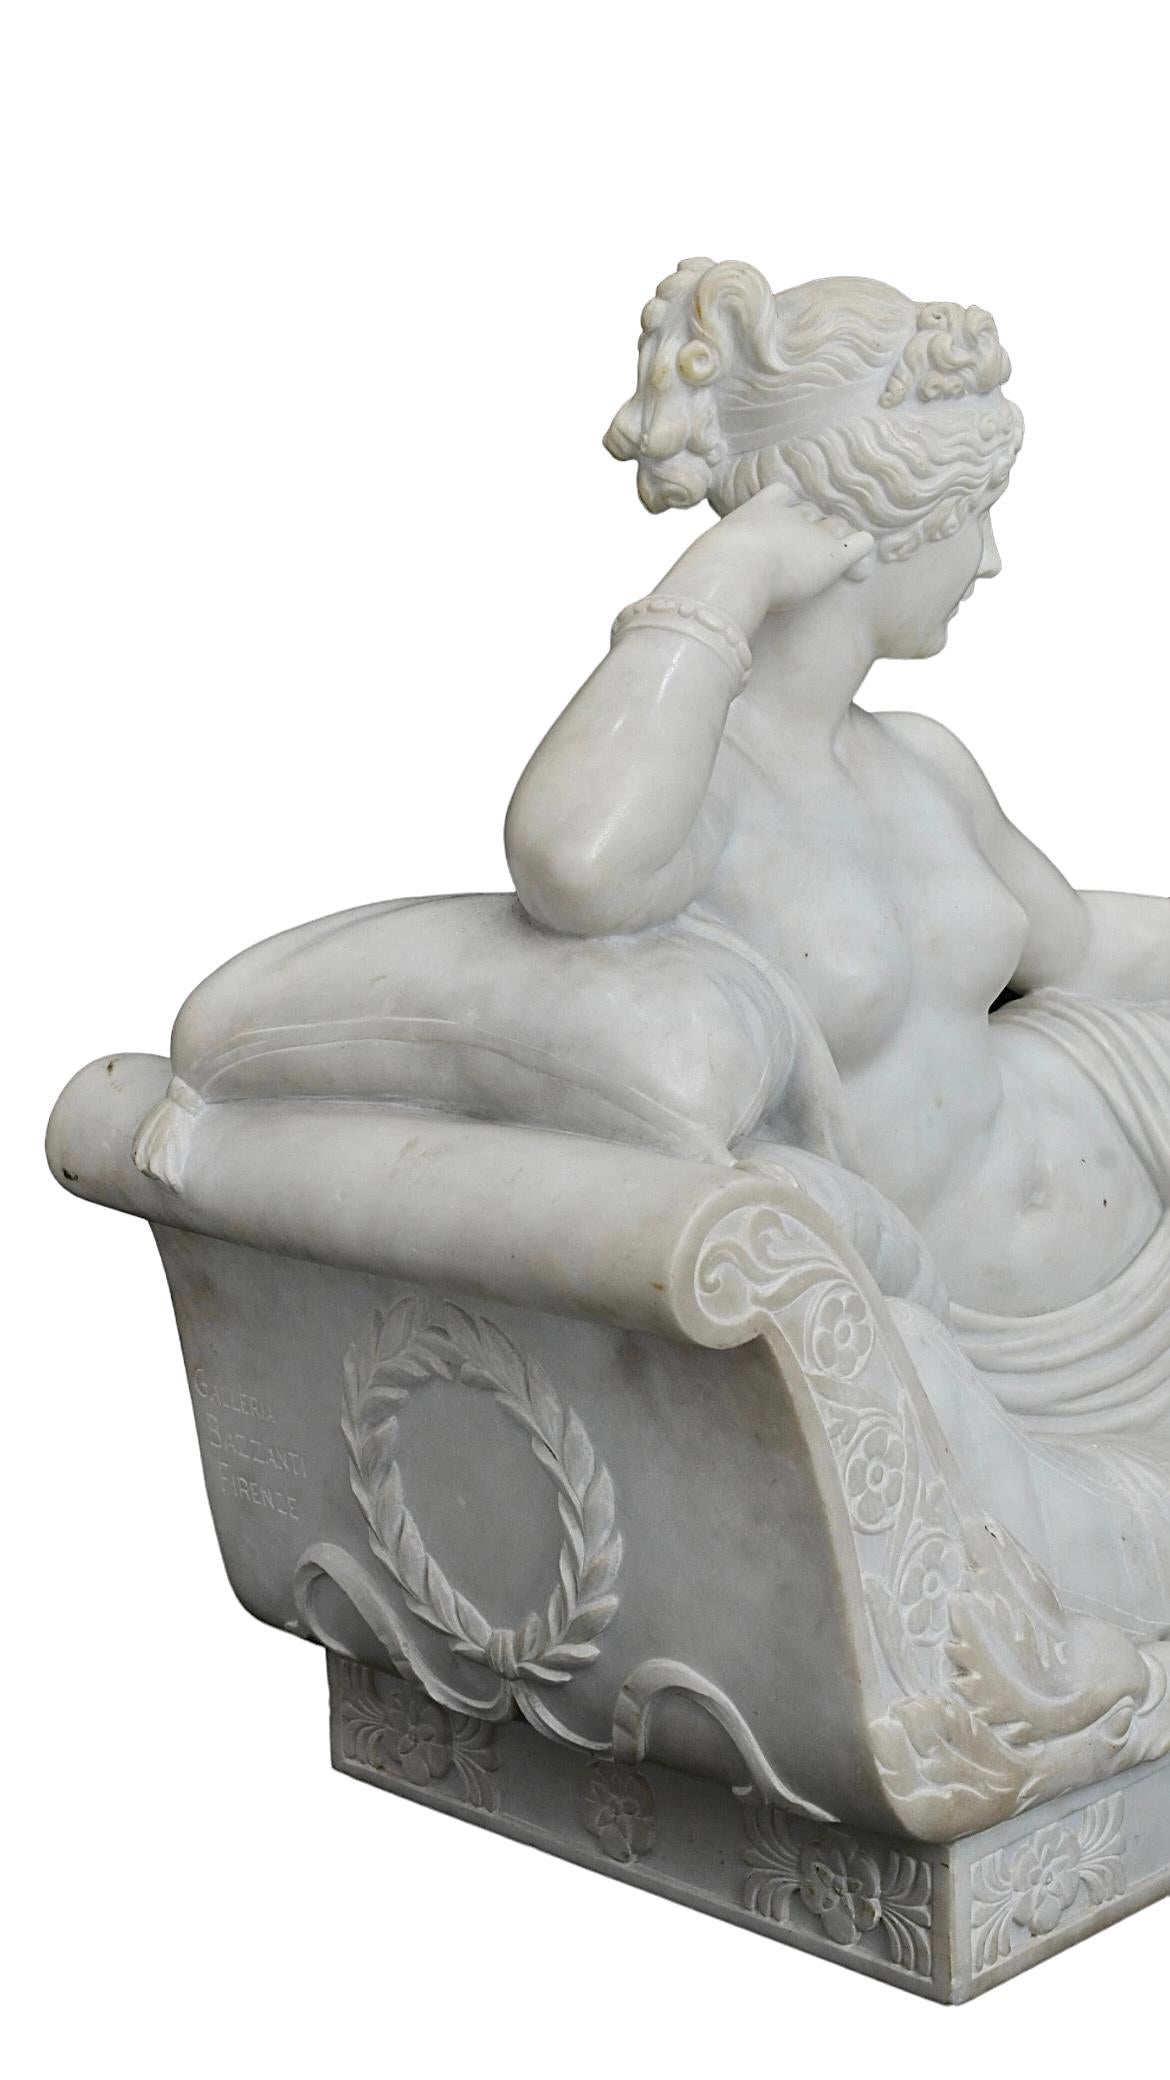 Hand-Carved Large 19th Century Italian Marble Statue of Venus Victrix by Pietro Bazzanti